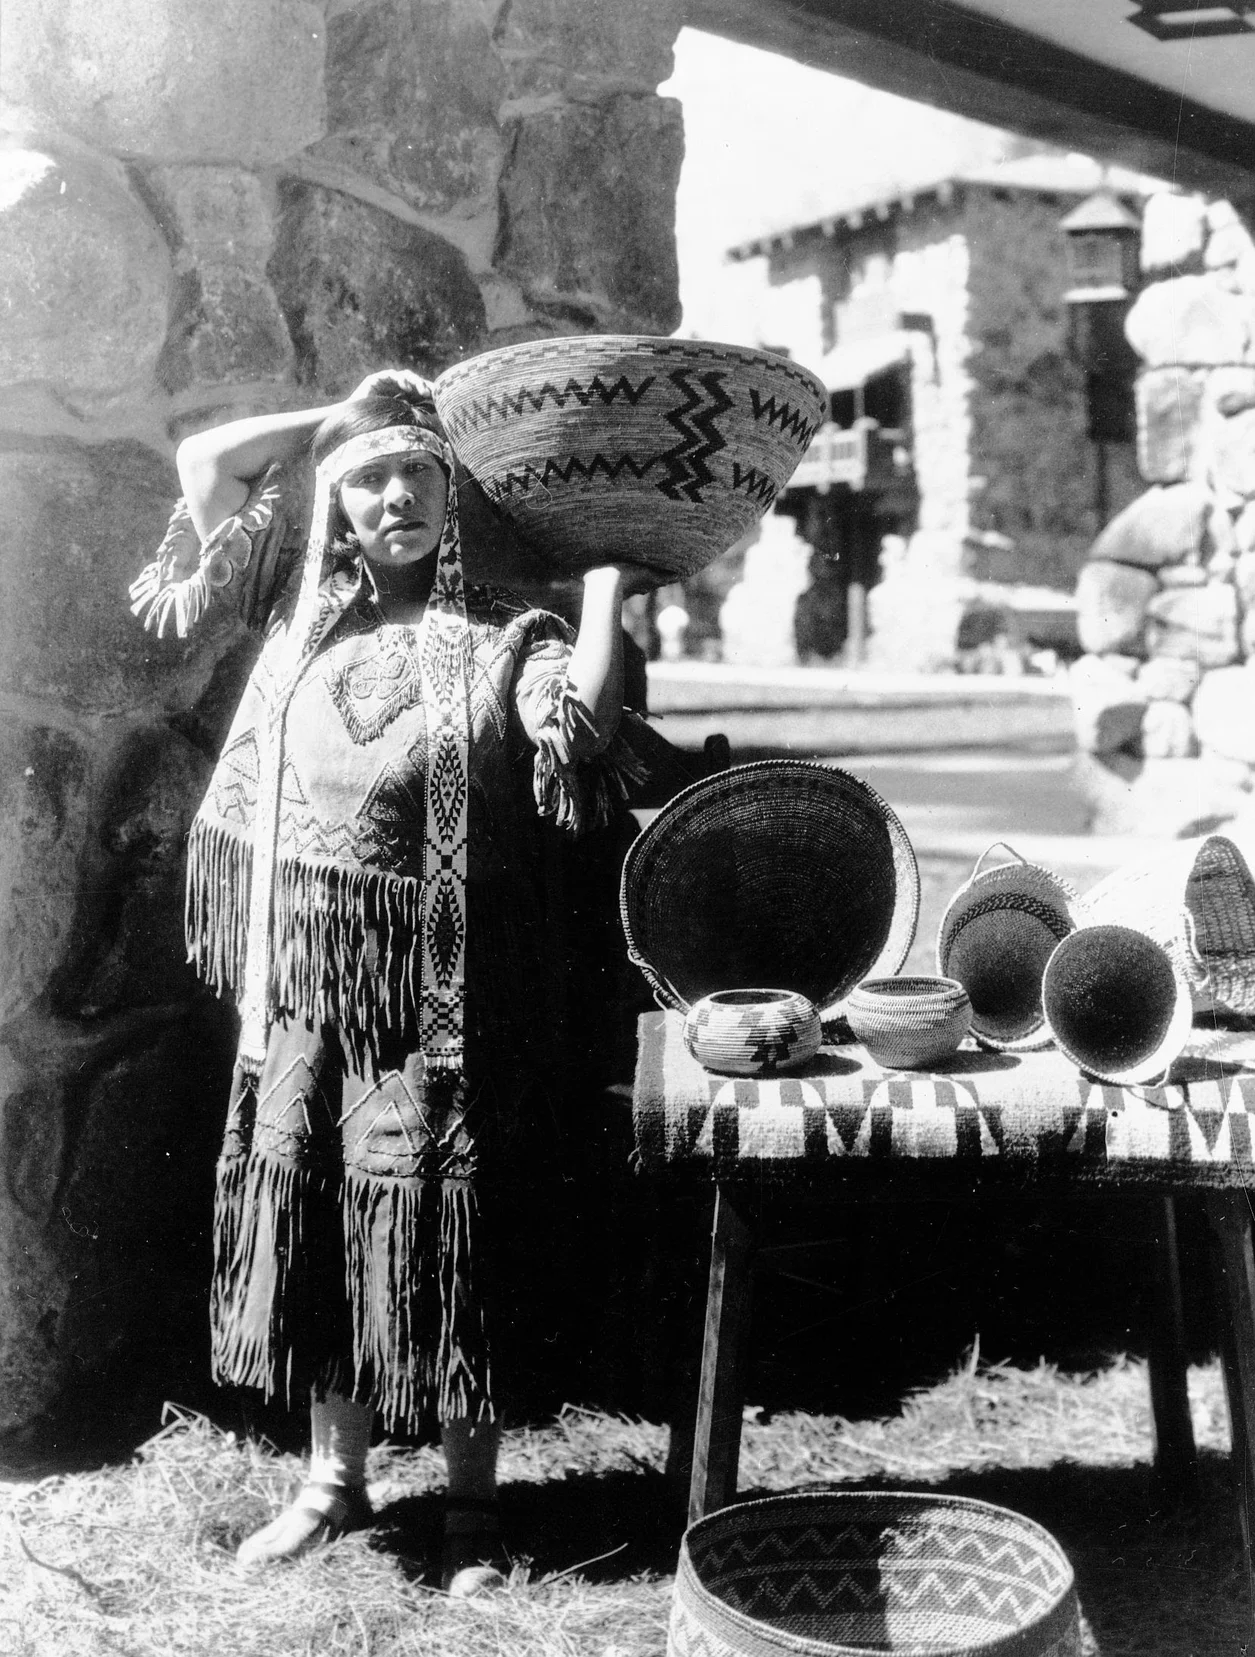 A black and white photograph of a person with baskets.